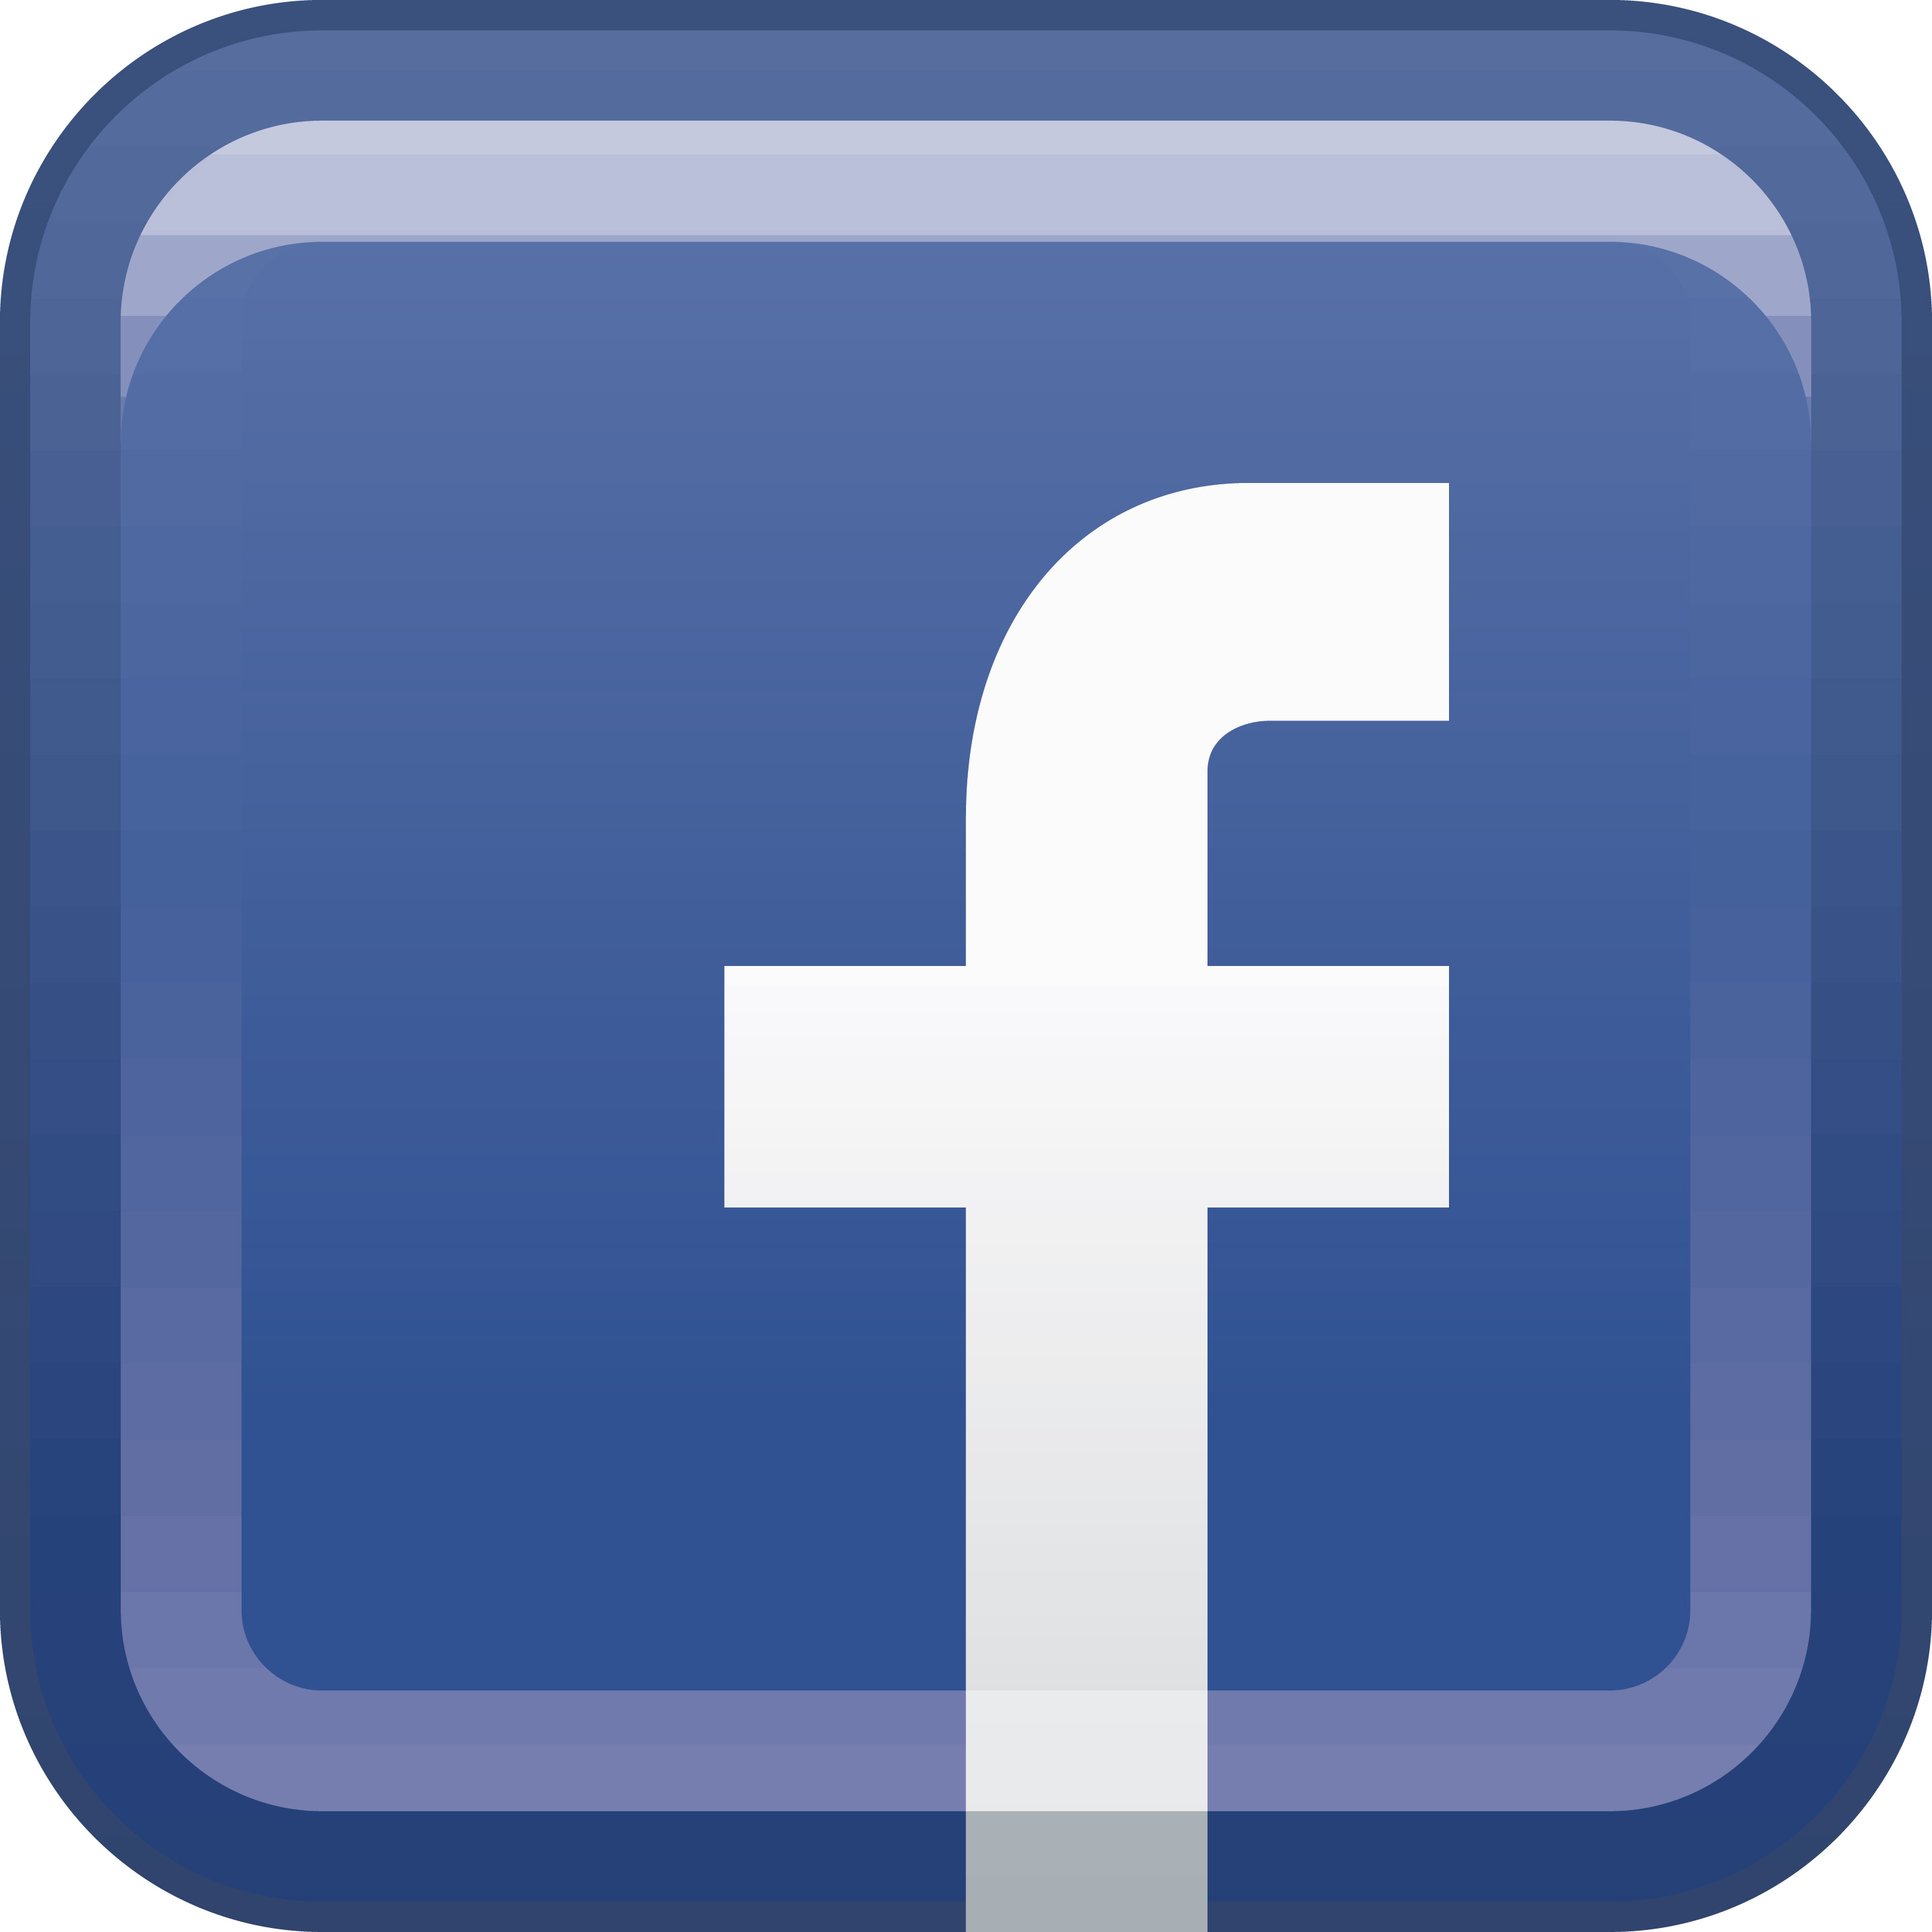 gallery facebook group icon png #6952